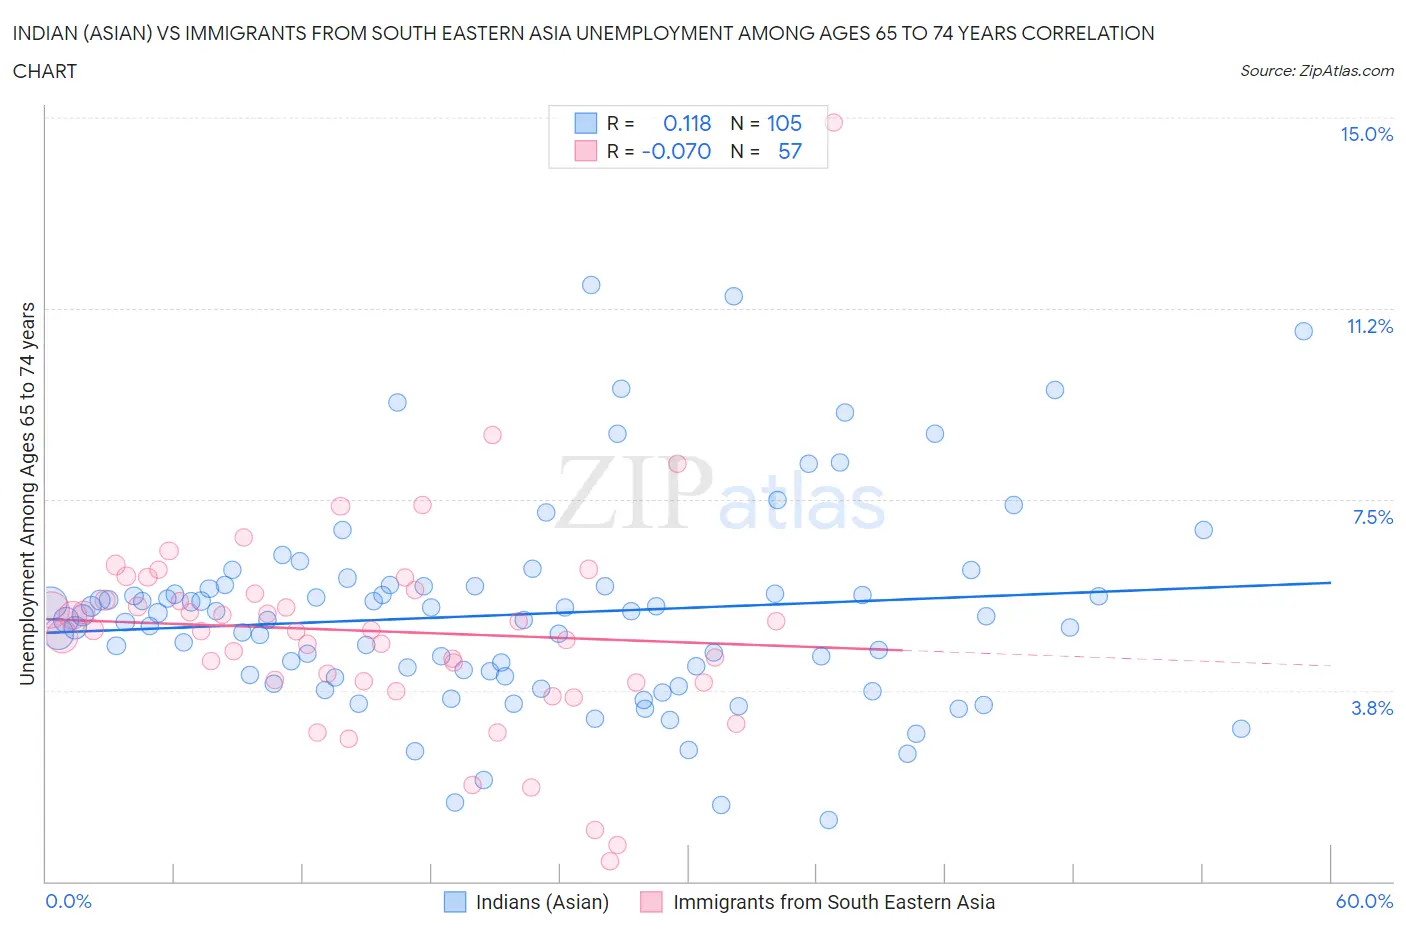 Indian (Asian) vs Immigrants from South Eastern Asia Unemployment Among Ages 65 to 74 years